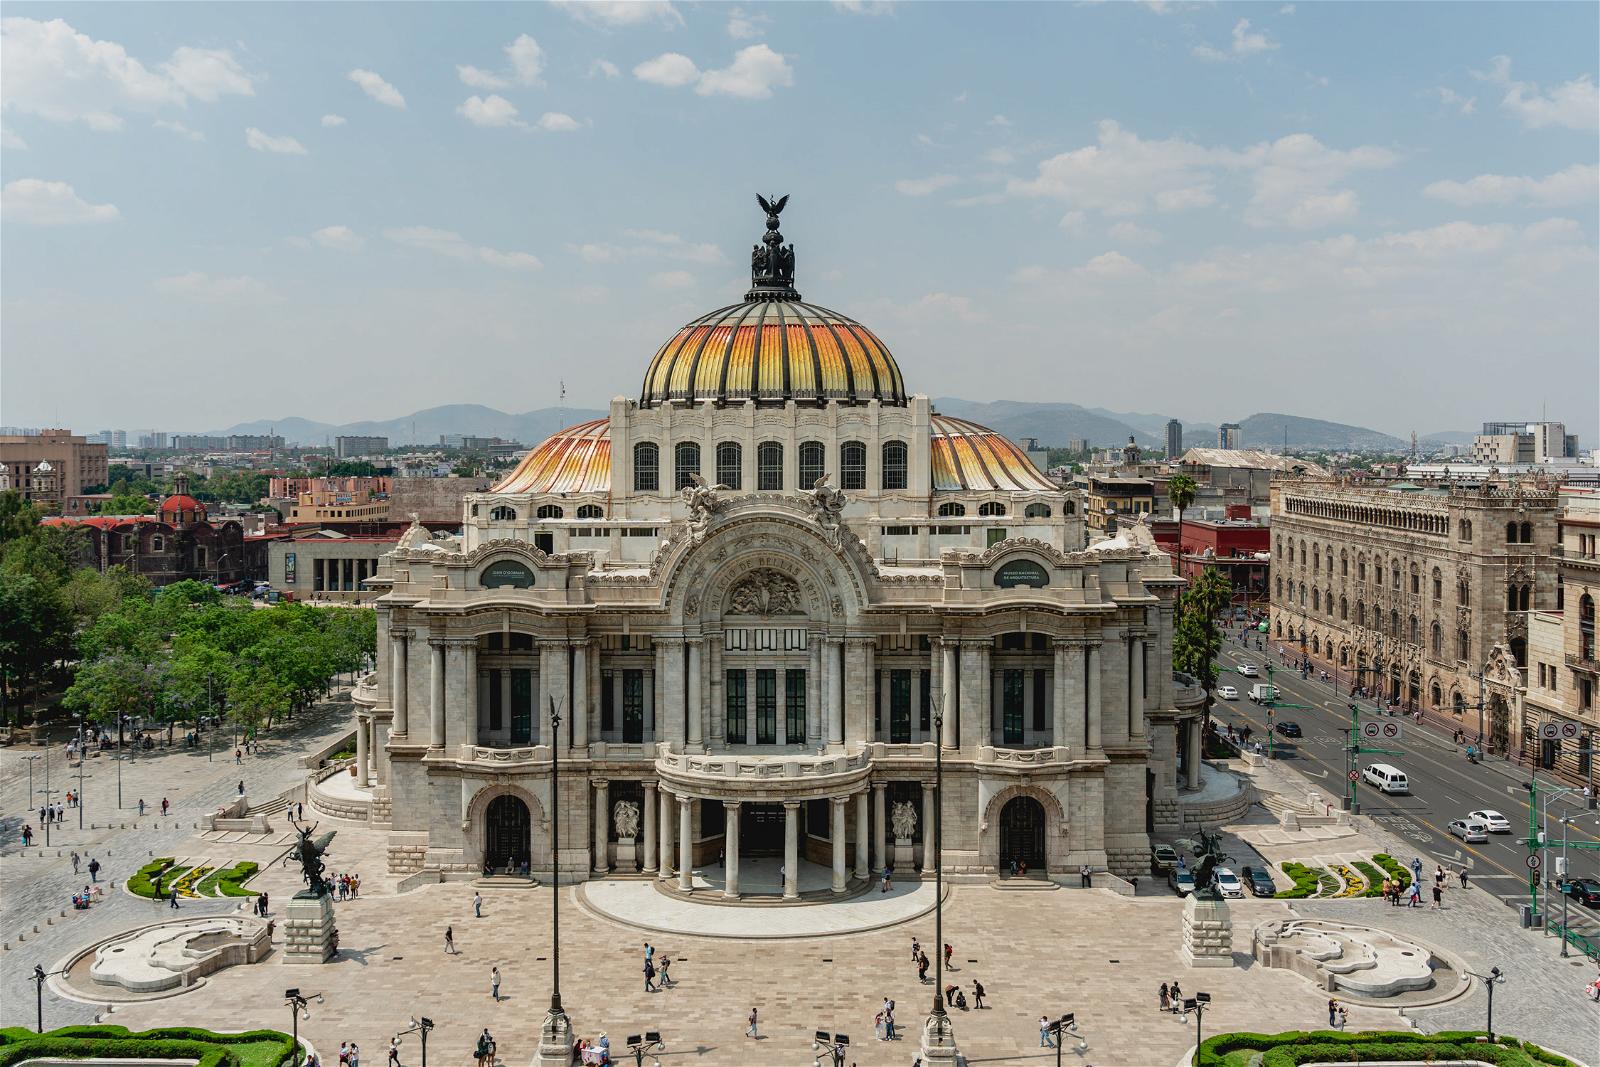 Photos of the Top sights in Mexico City’s Downtown (Centro)